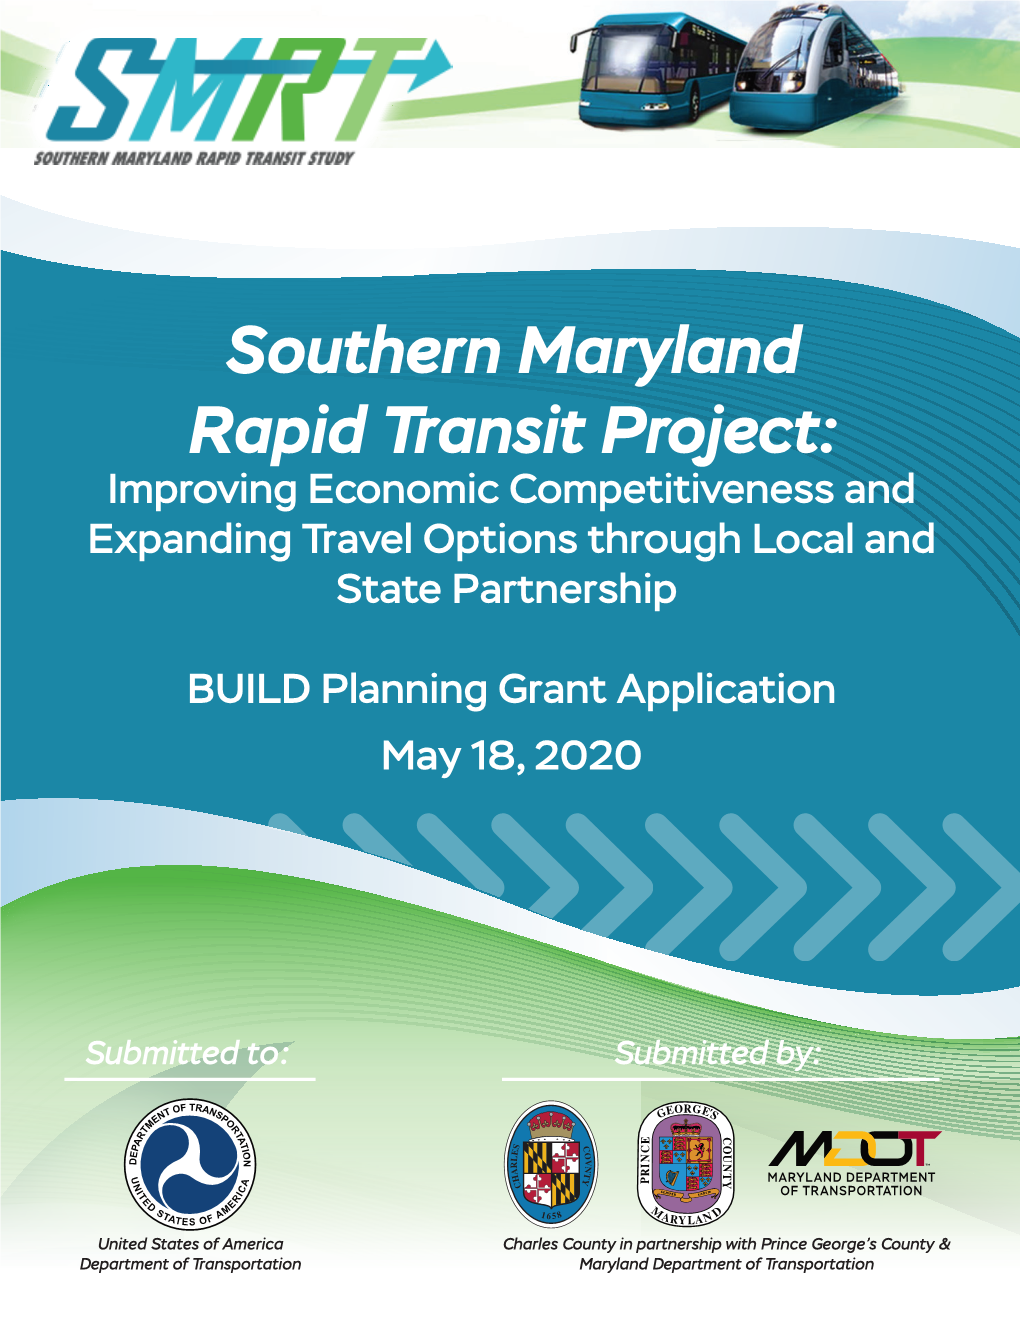 Southern Maryland Rapid Transit Project: Improving Economic Competitiveness and Expanding Travel Options Through Local and State Partnership